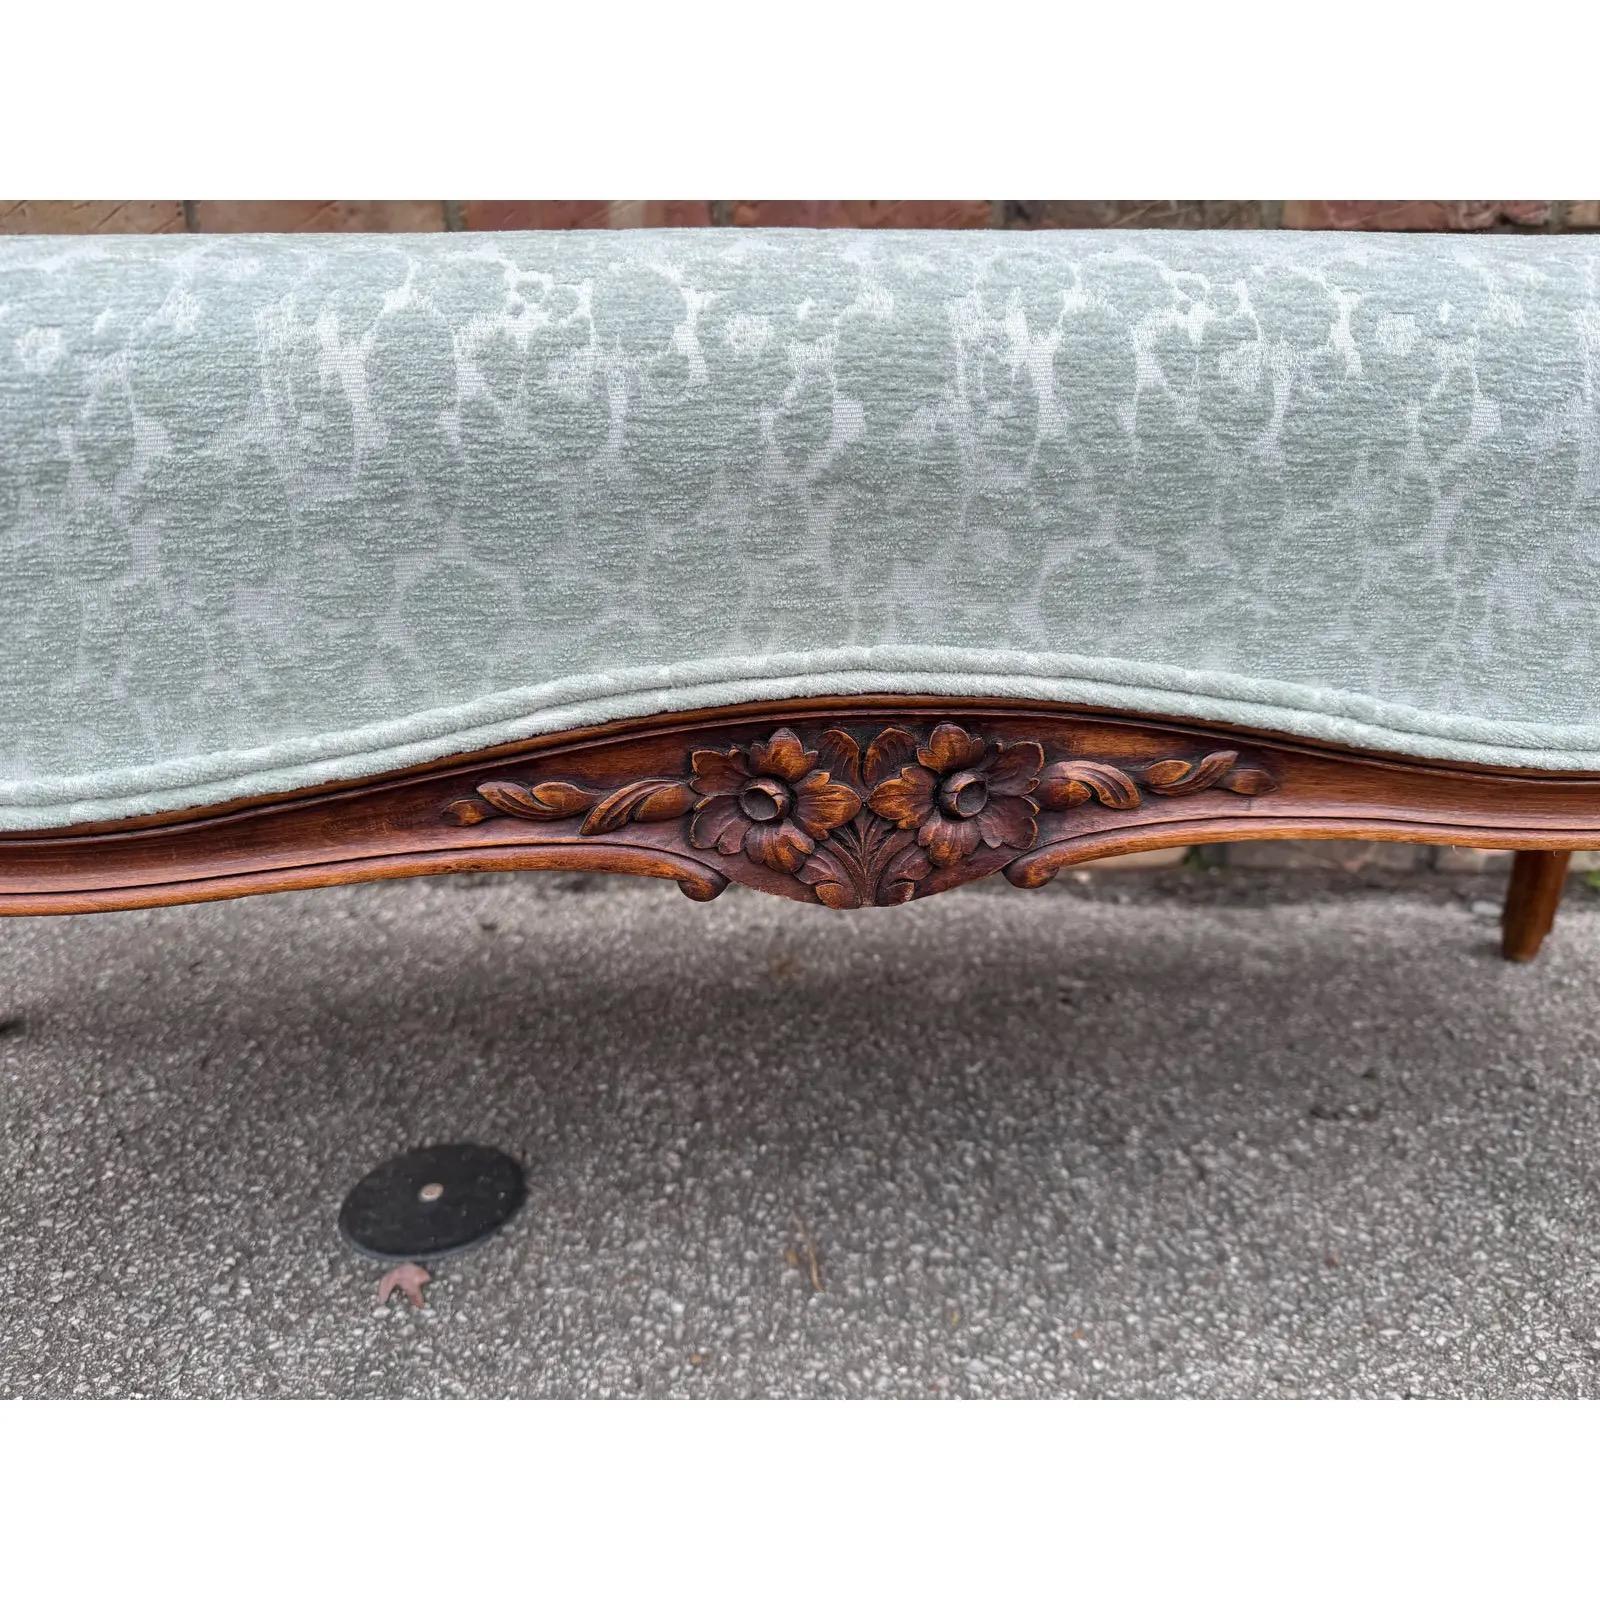 This is a beautiful French frame that we have had recently upholstered. The frame has gorgeous hand carved detail on the center and legs. The flower and leaves have such intricate texture! The fabric is a soft grey/blue leopard print velvet. This